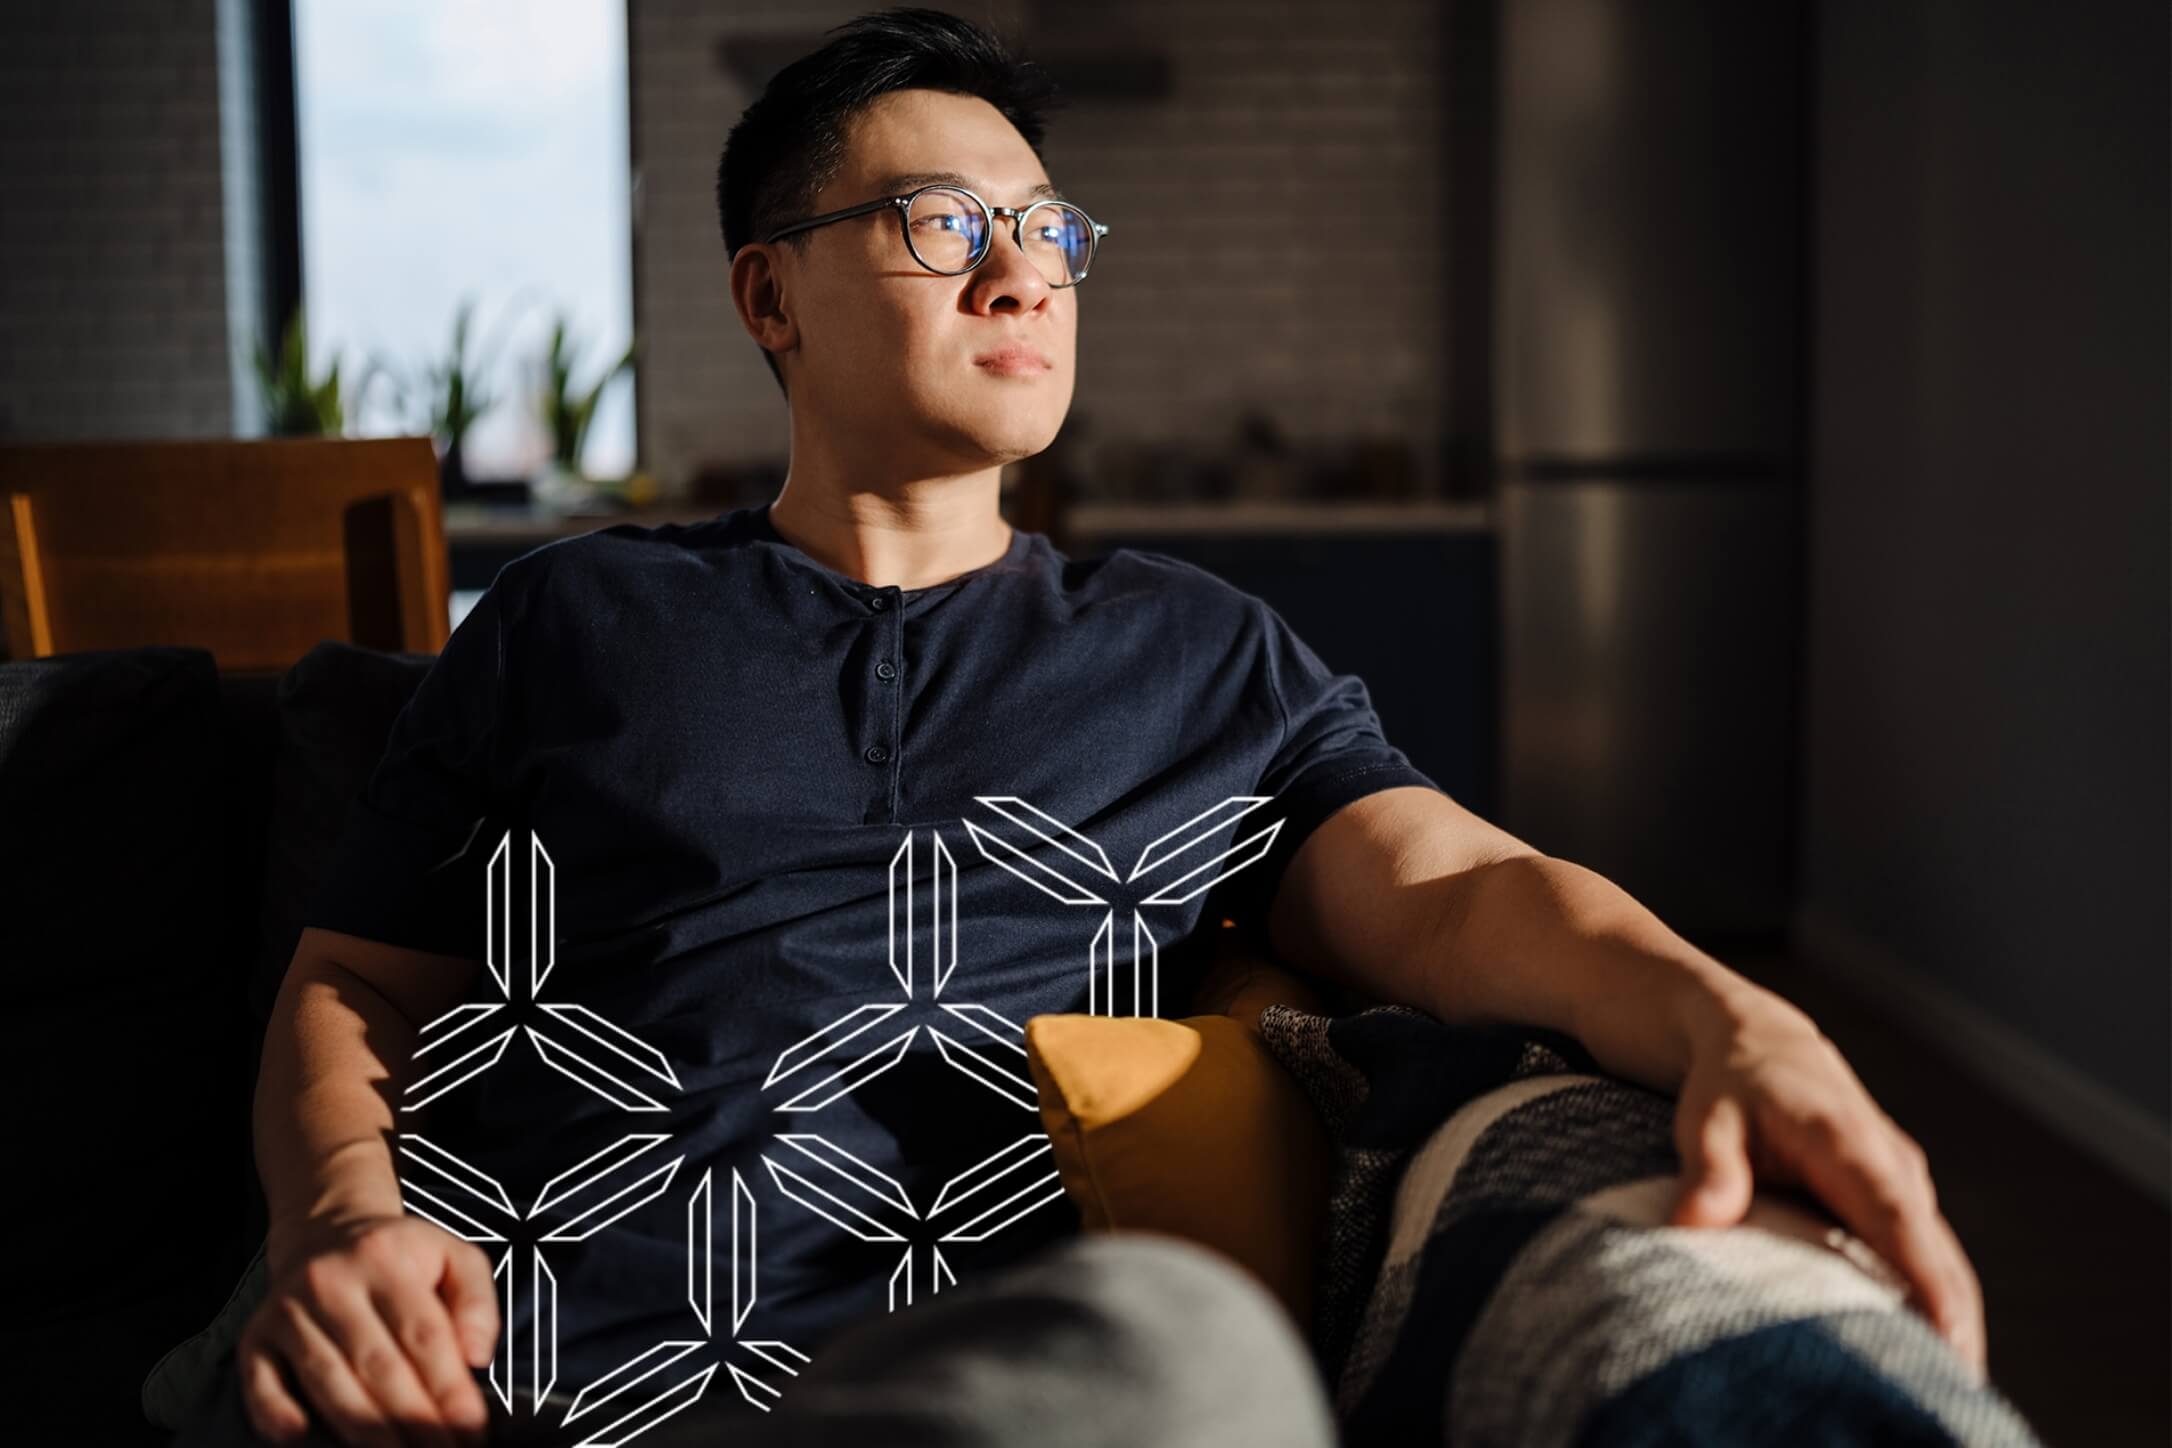 Man with glasses sitting on couch looks to the right